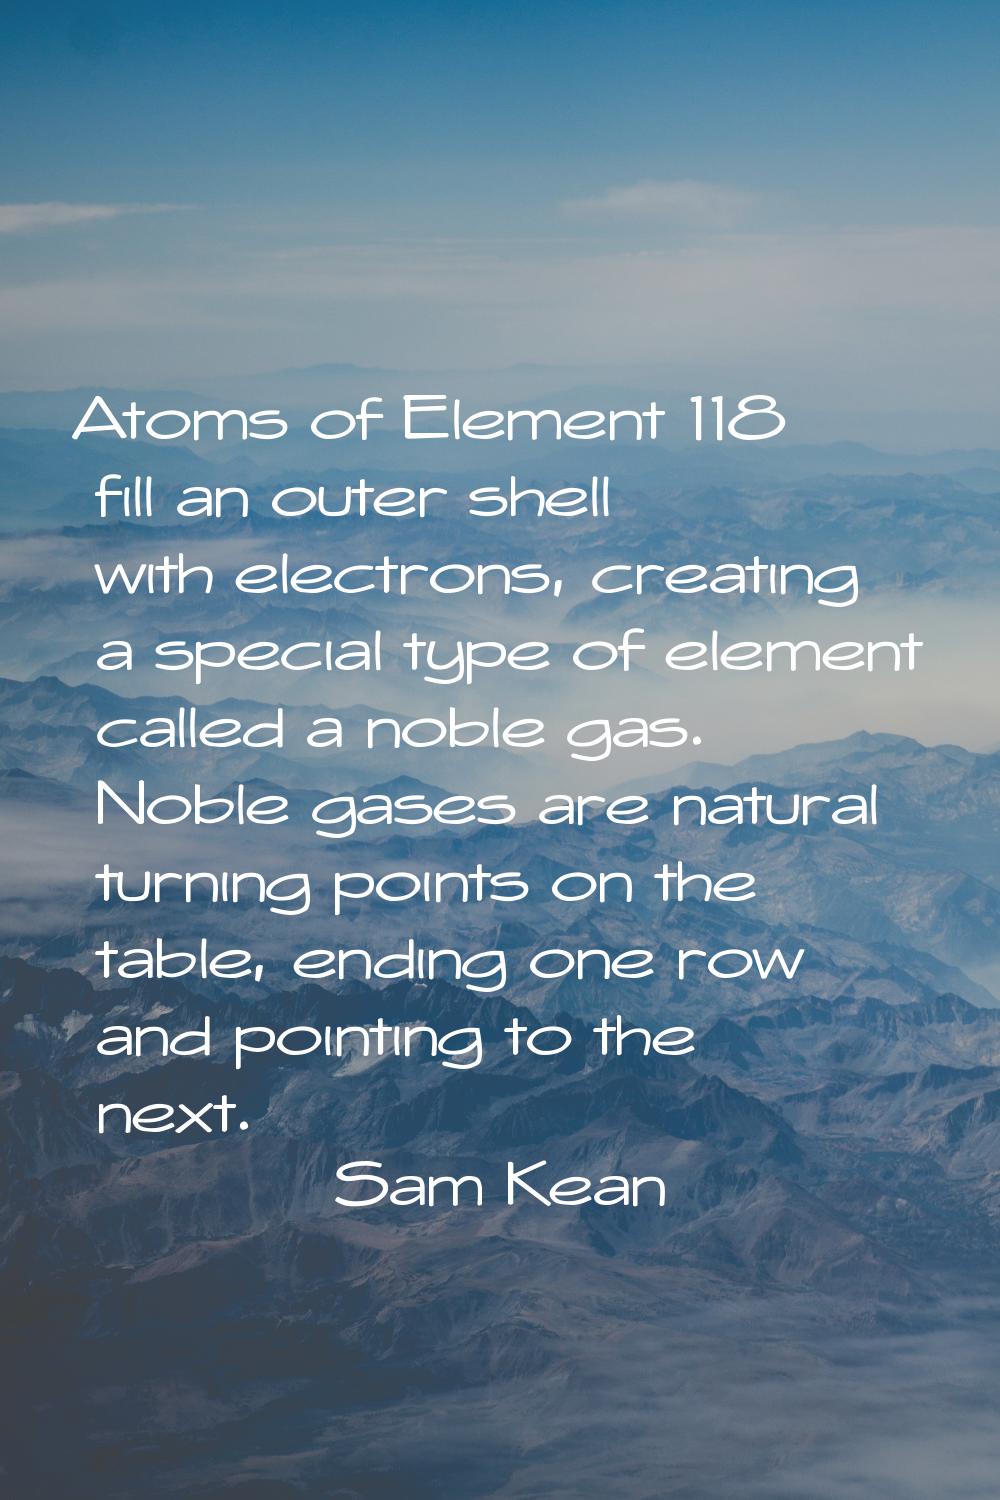 Atoms of Element 118 fill an outer shell with electrons, creating a special type of element called 